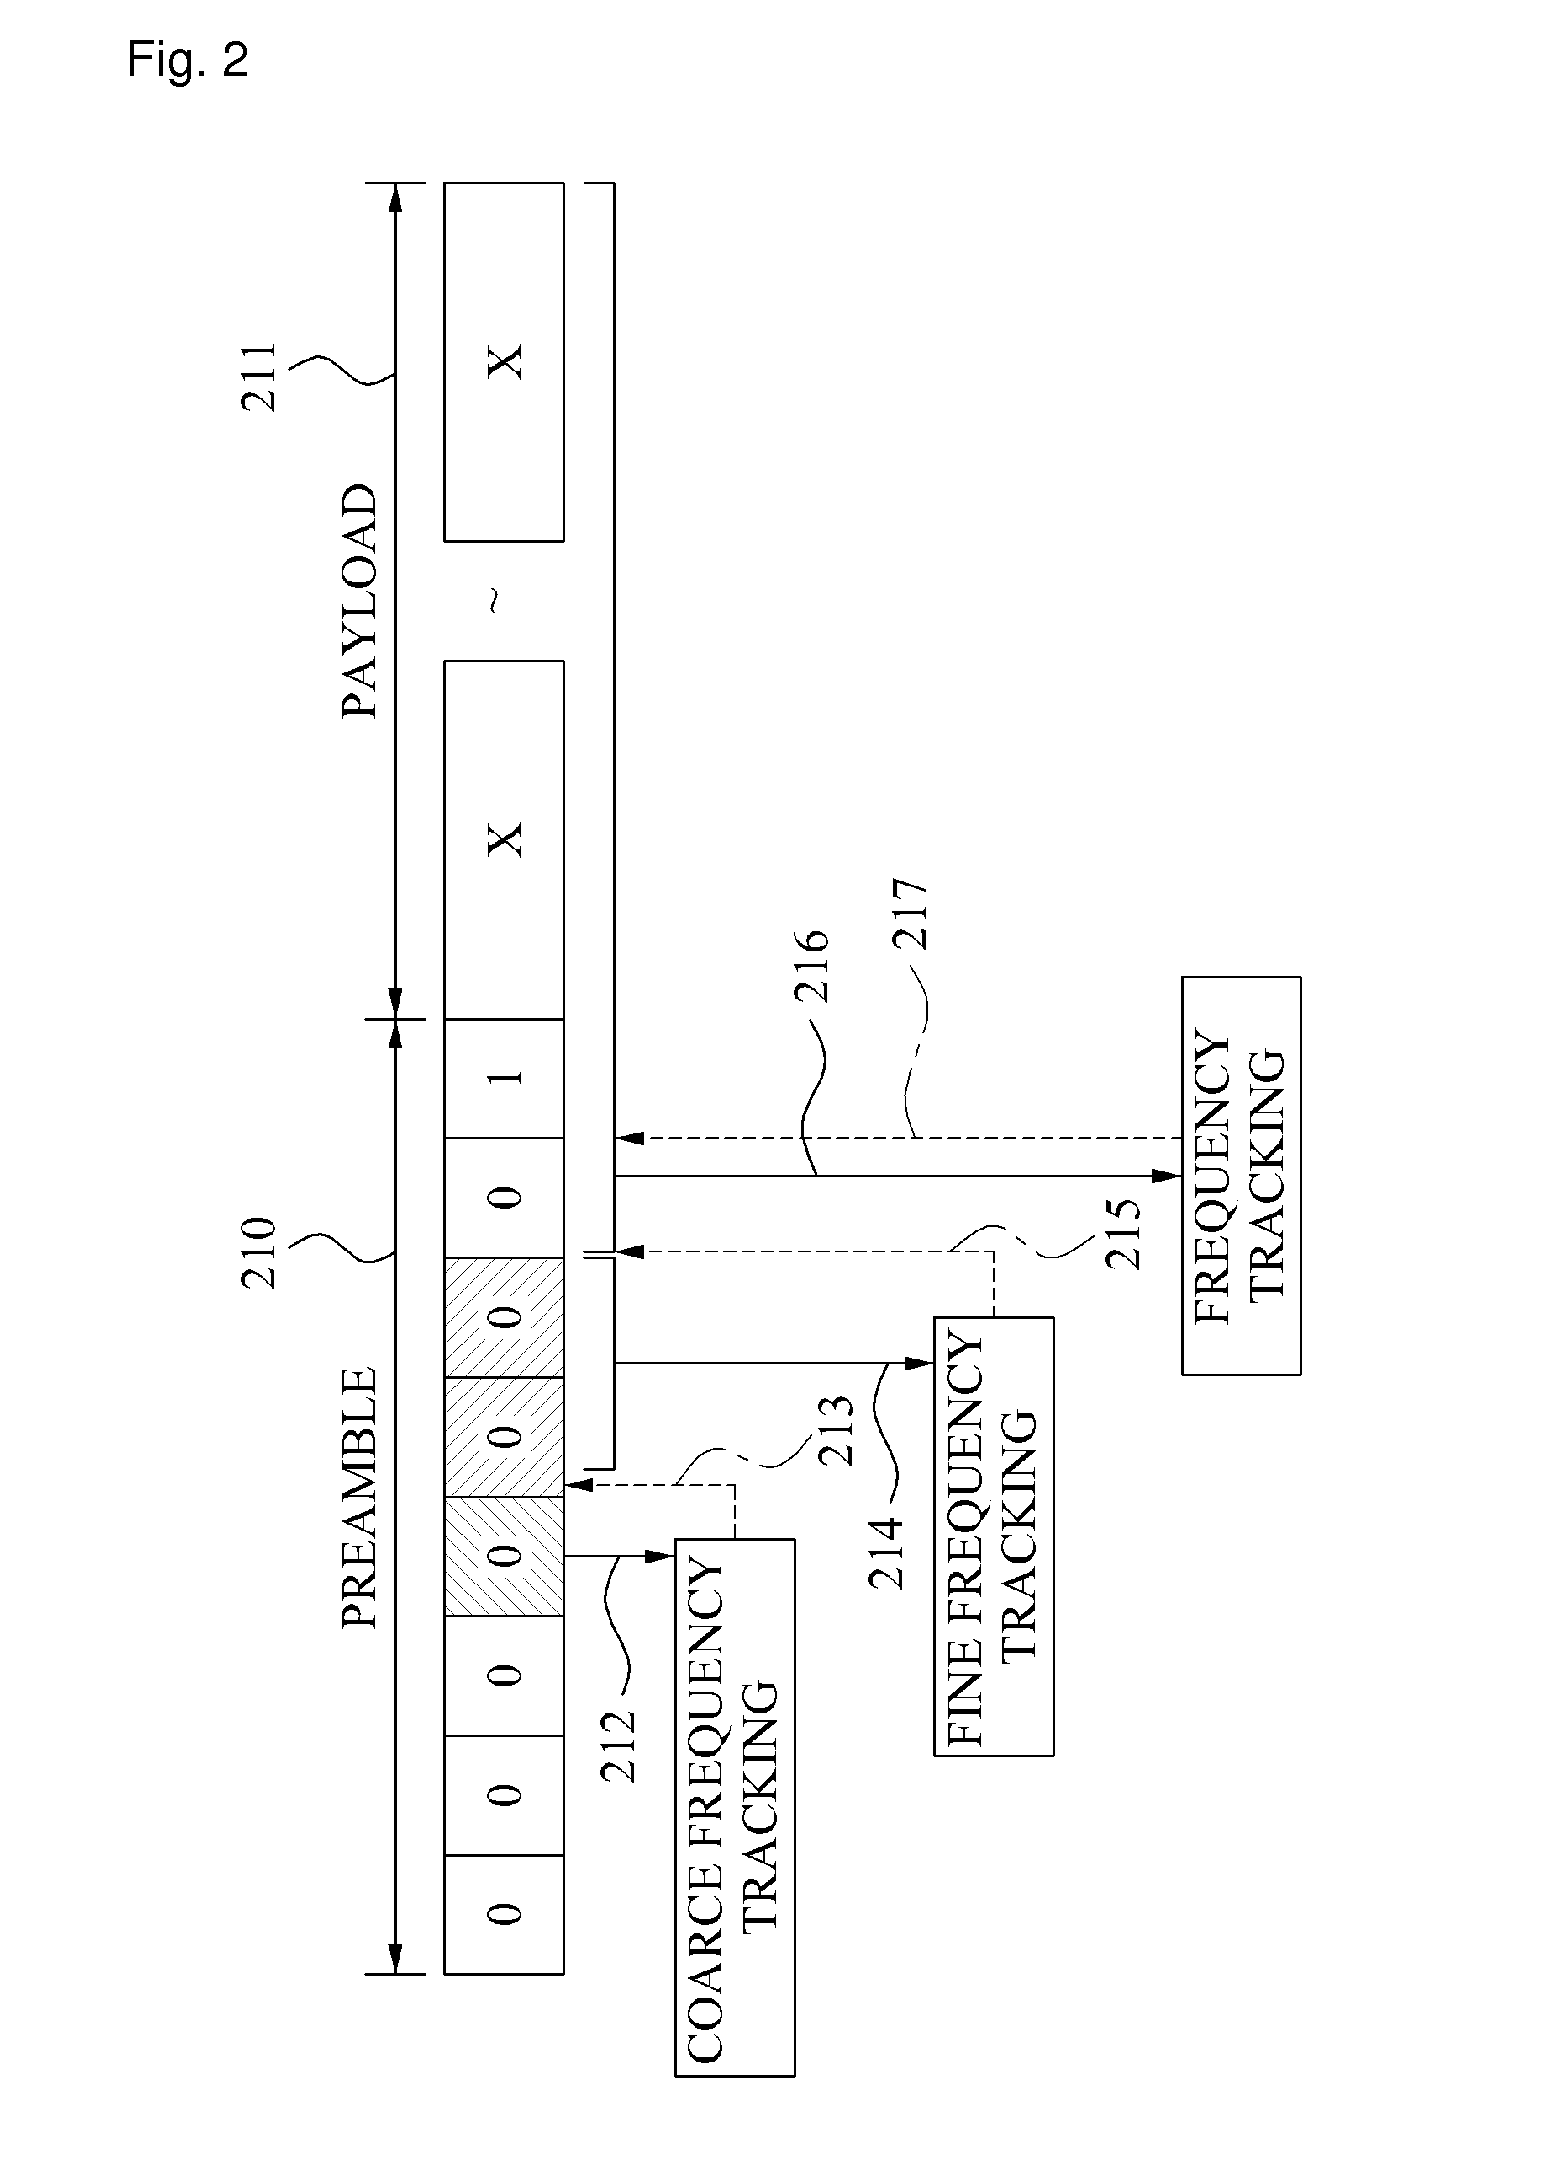 Multistage channel estimation method and apparatus